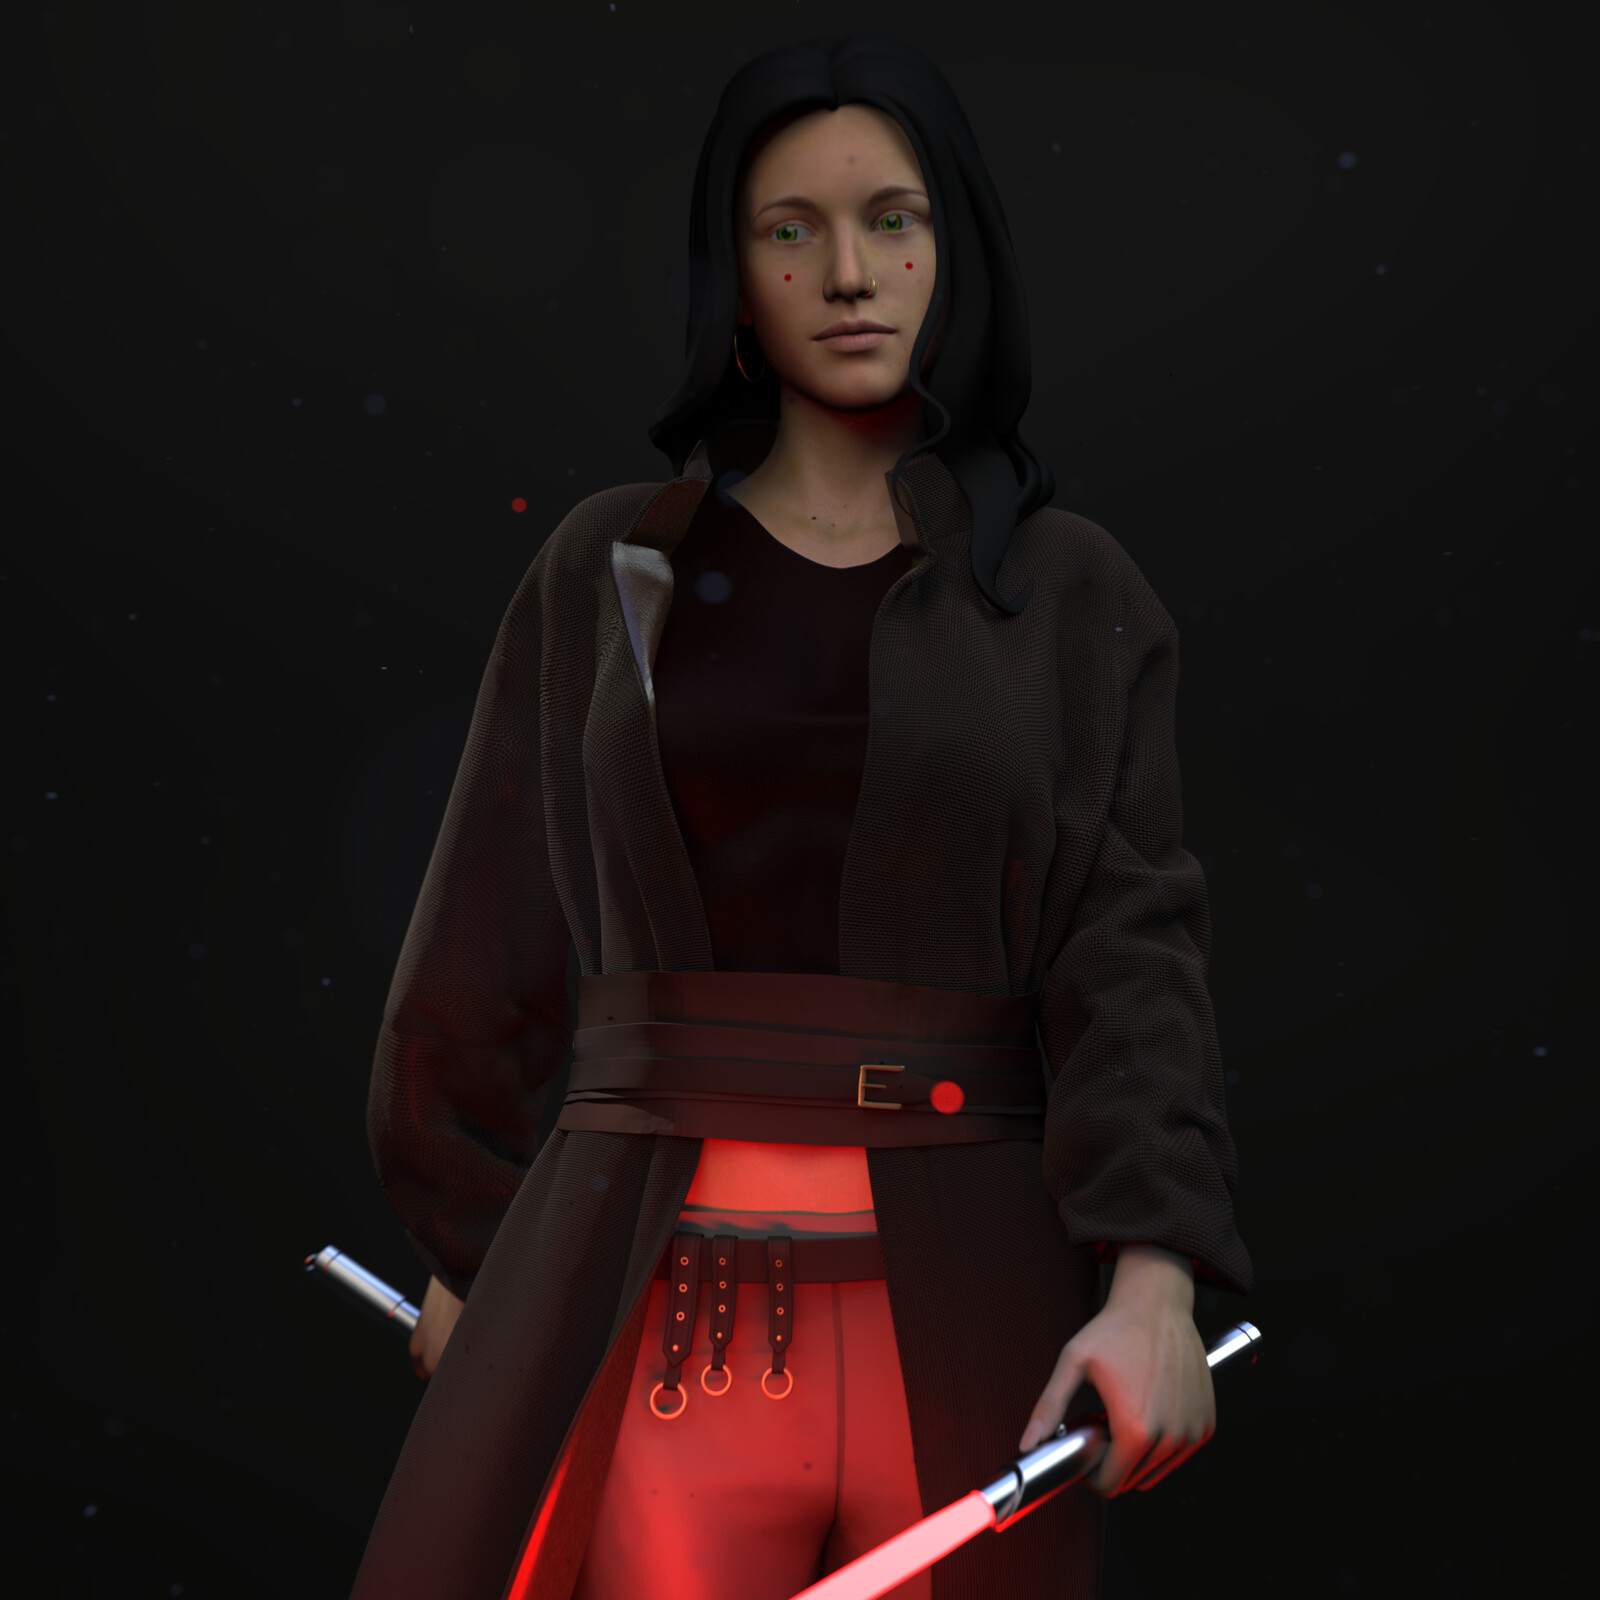 The Sith - personal project